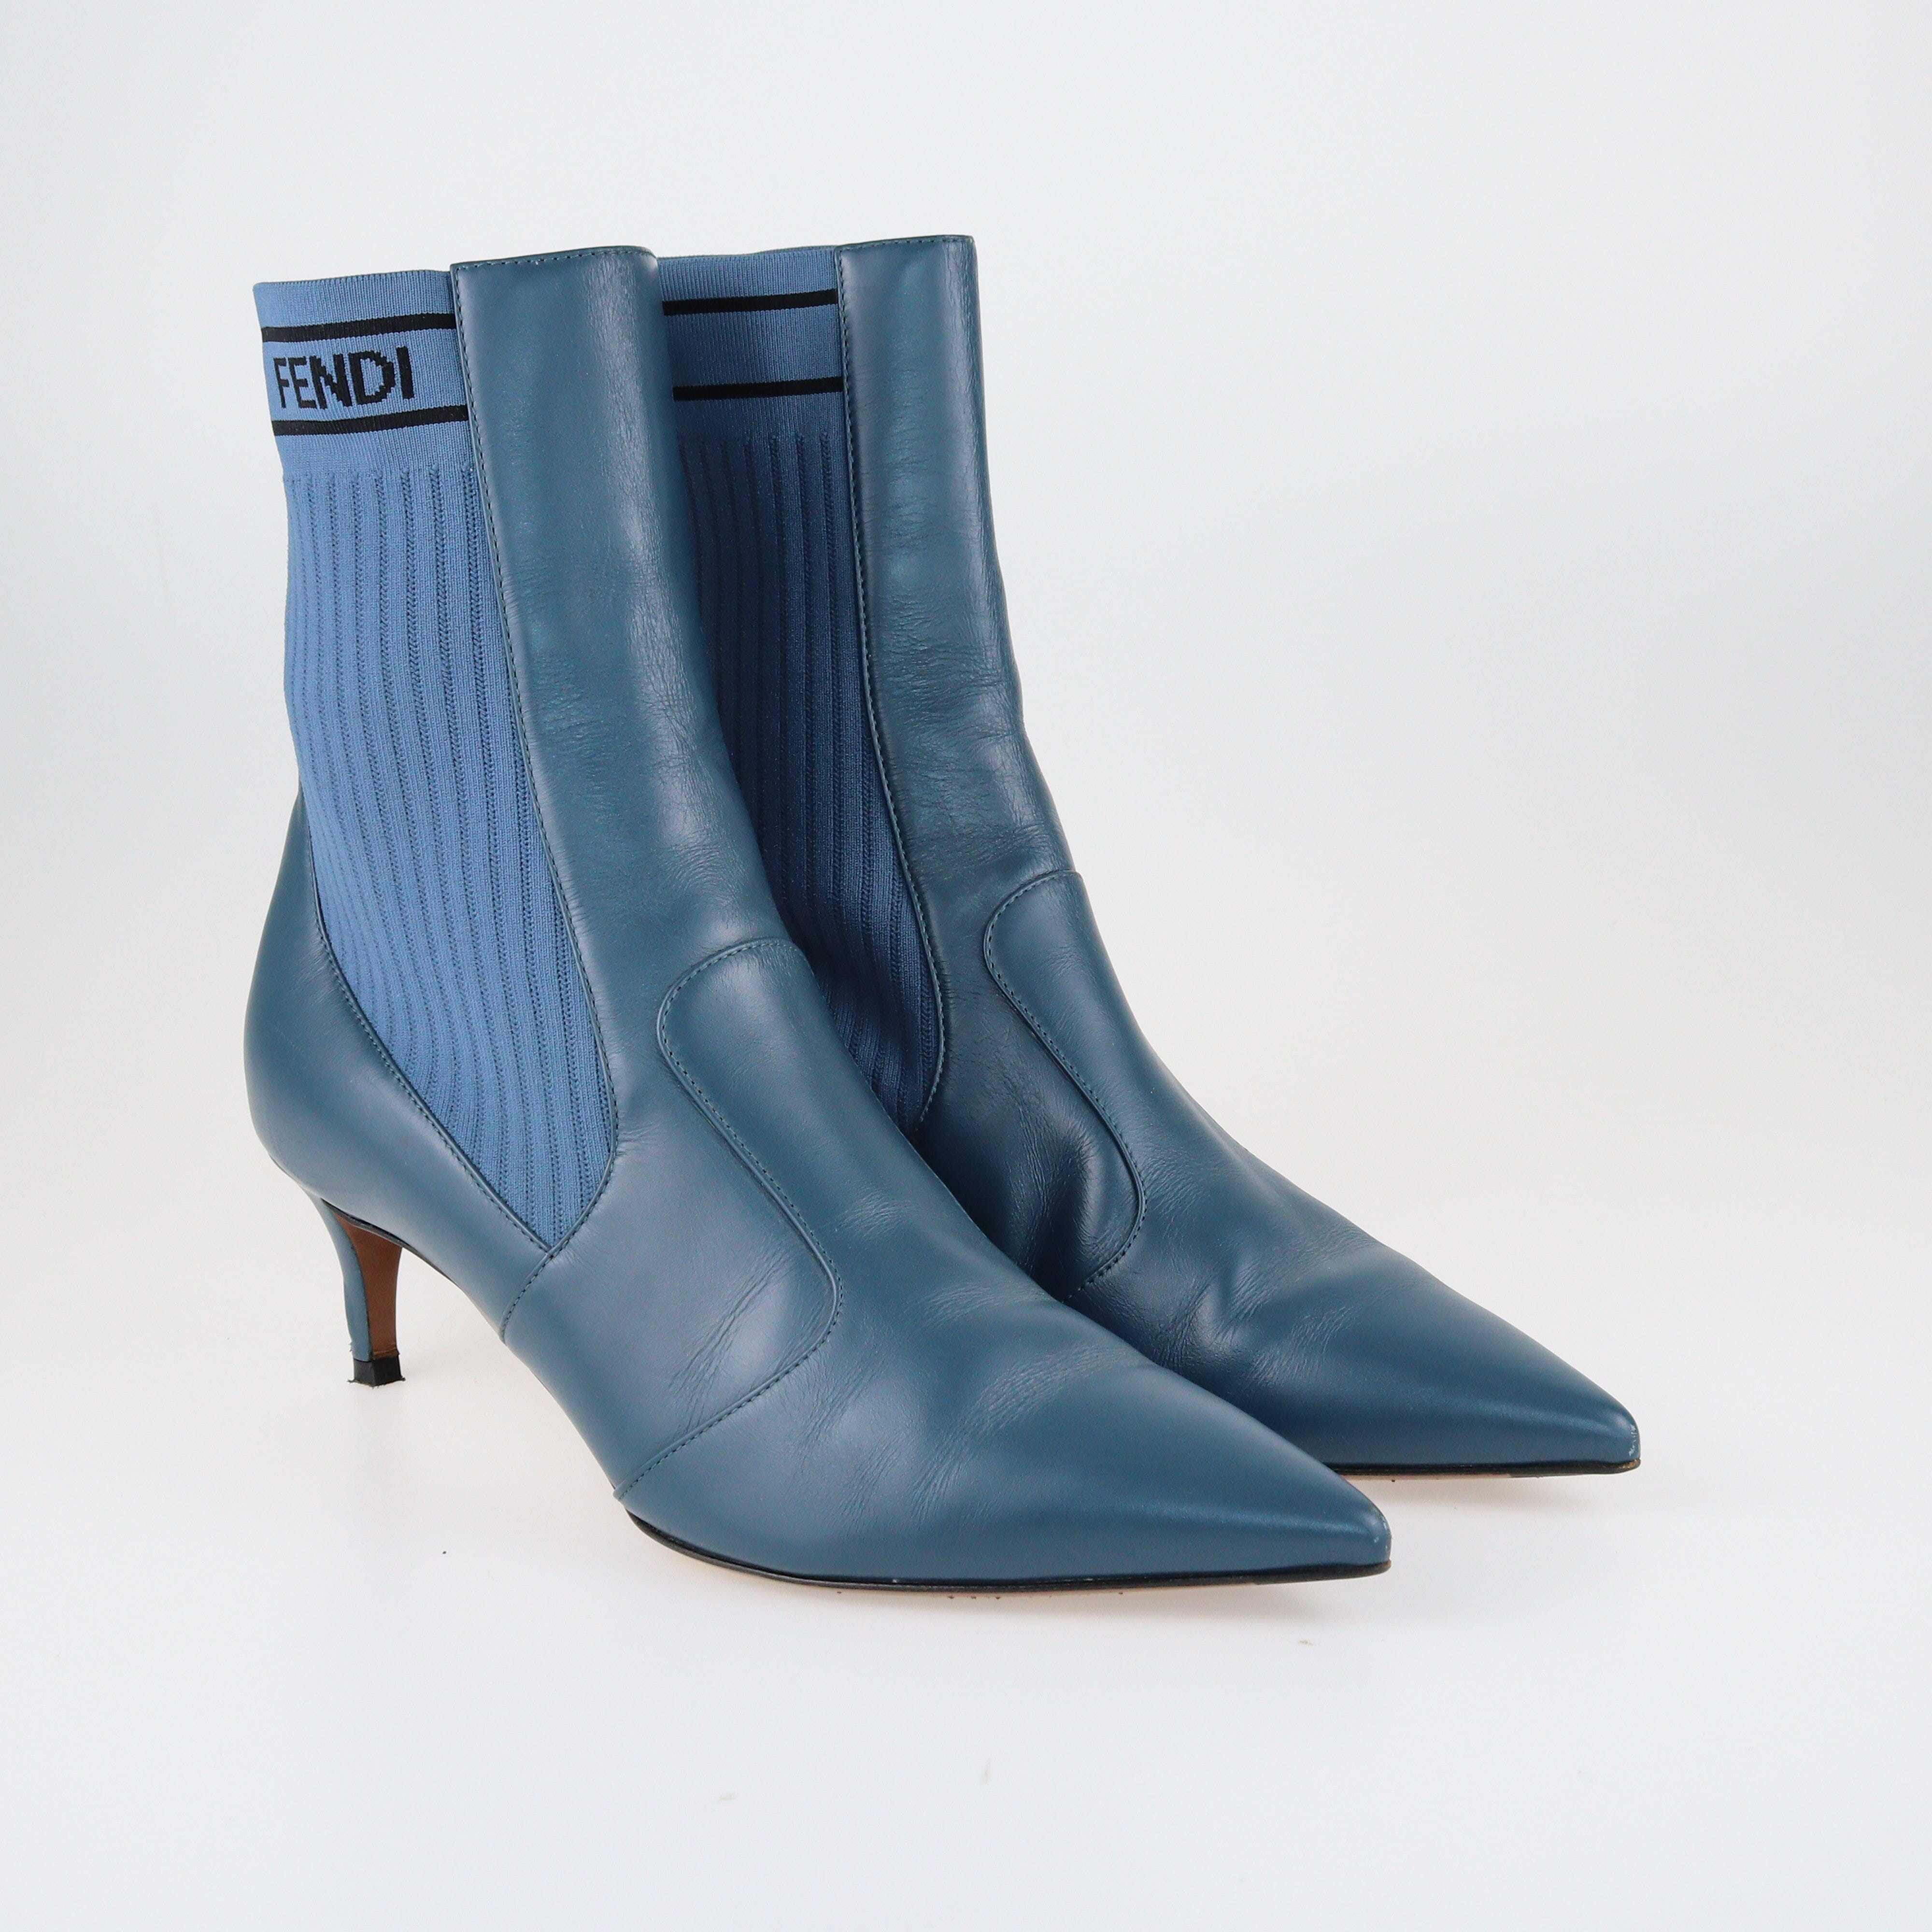 Blue Rockoko Pointed Toe Ankle Boots Shoes Fendi 